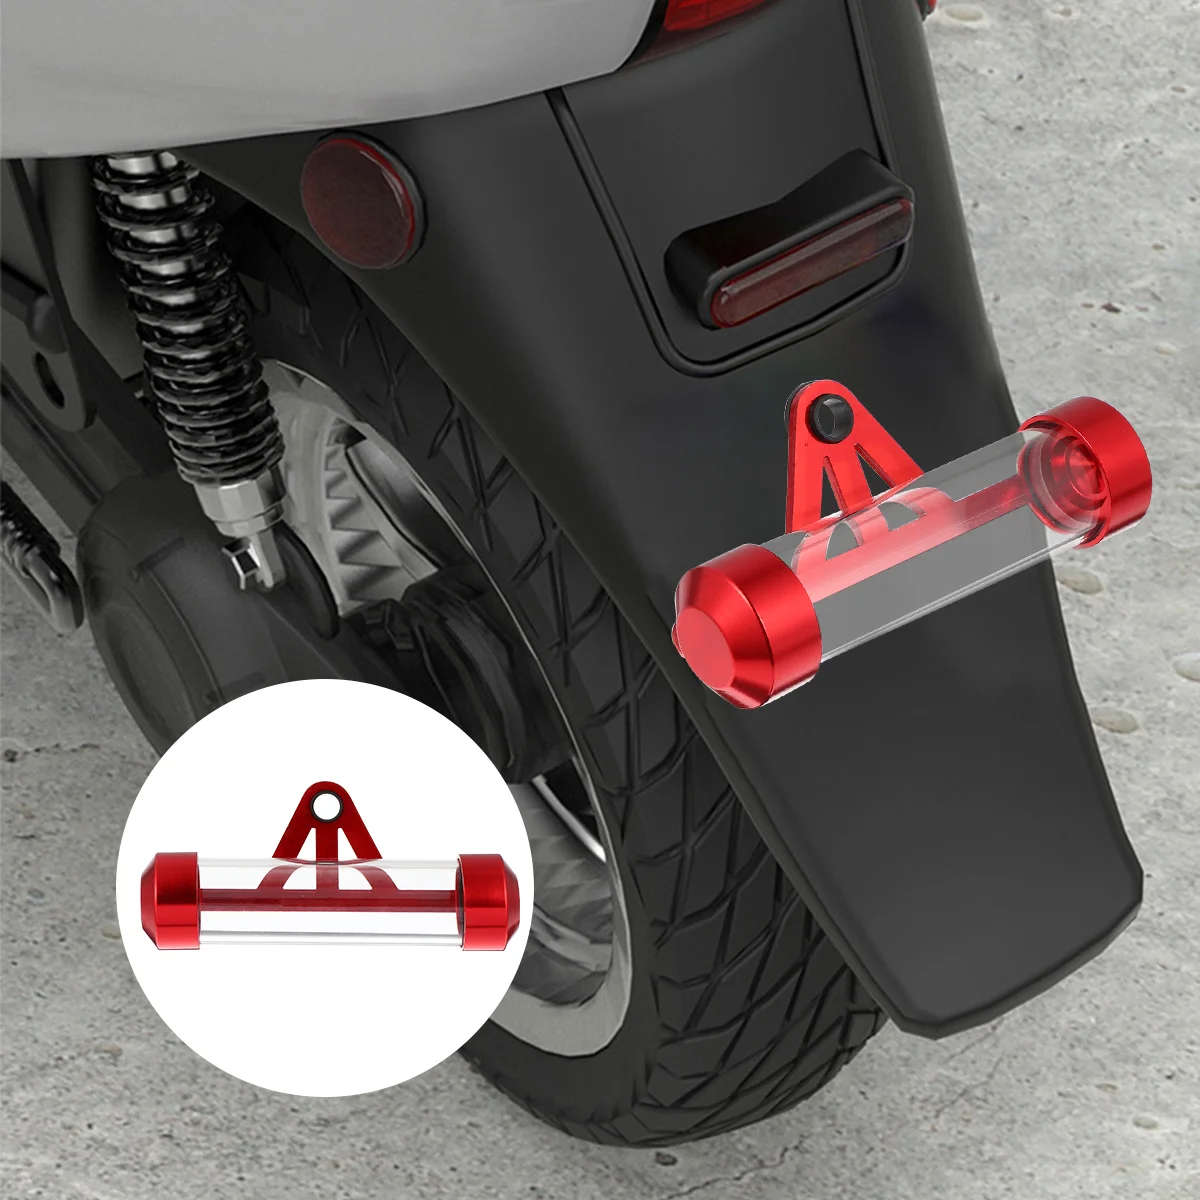 

Motorcycle Tax Bill Tube Scooter Tax Disc Holder Tax Bill Management Coil Motorbike Accessories Tax Disc Tube Holder Frame